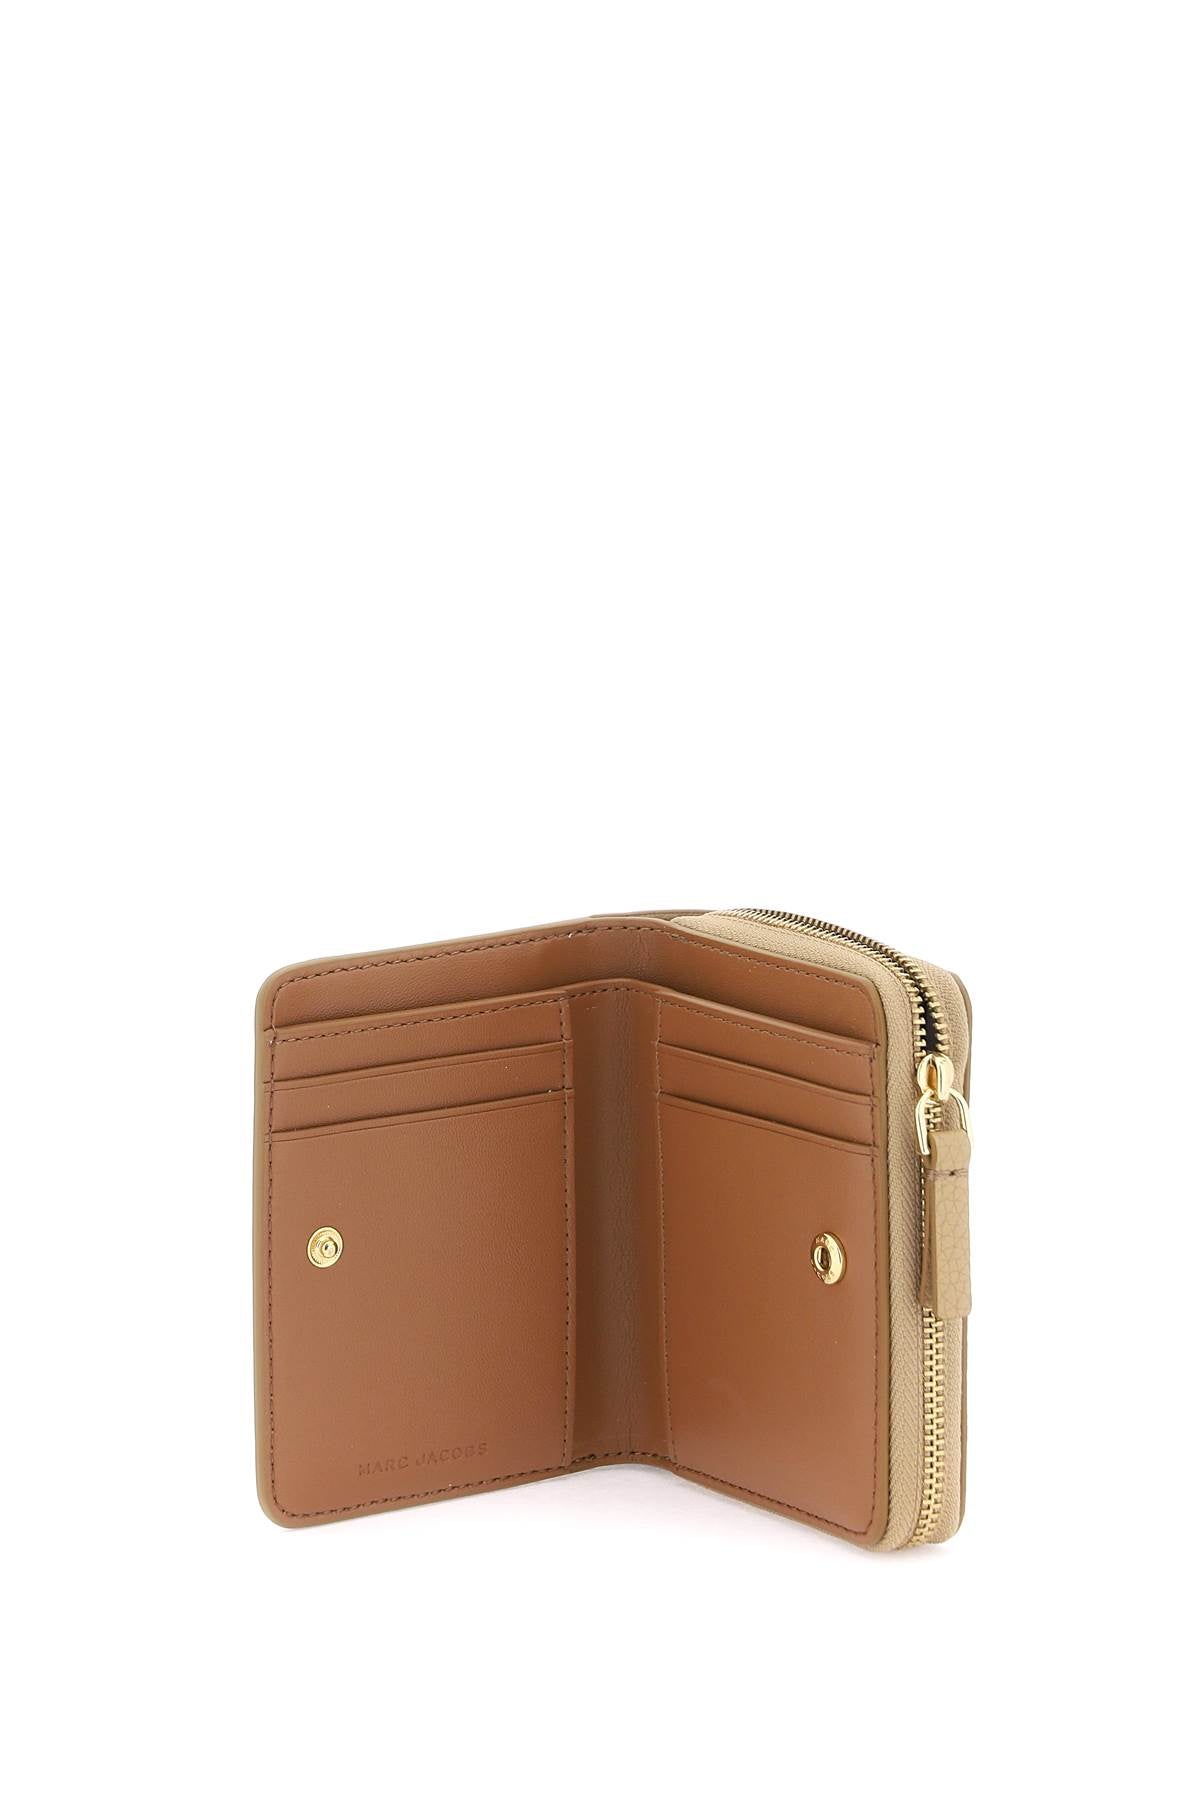 Marc Jacobs Marc jacobs the leather mini compact wallet